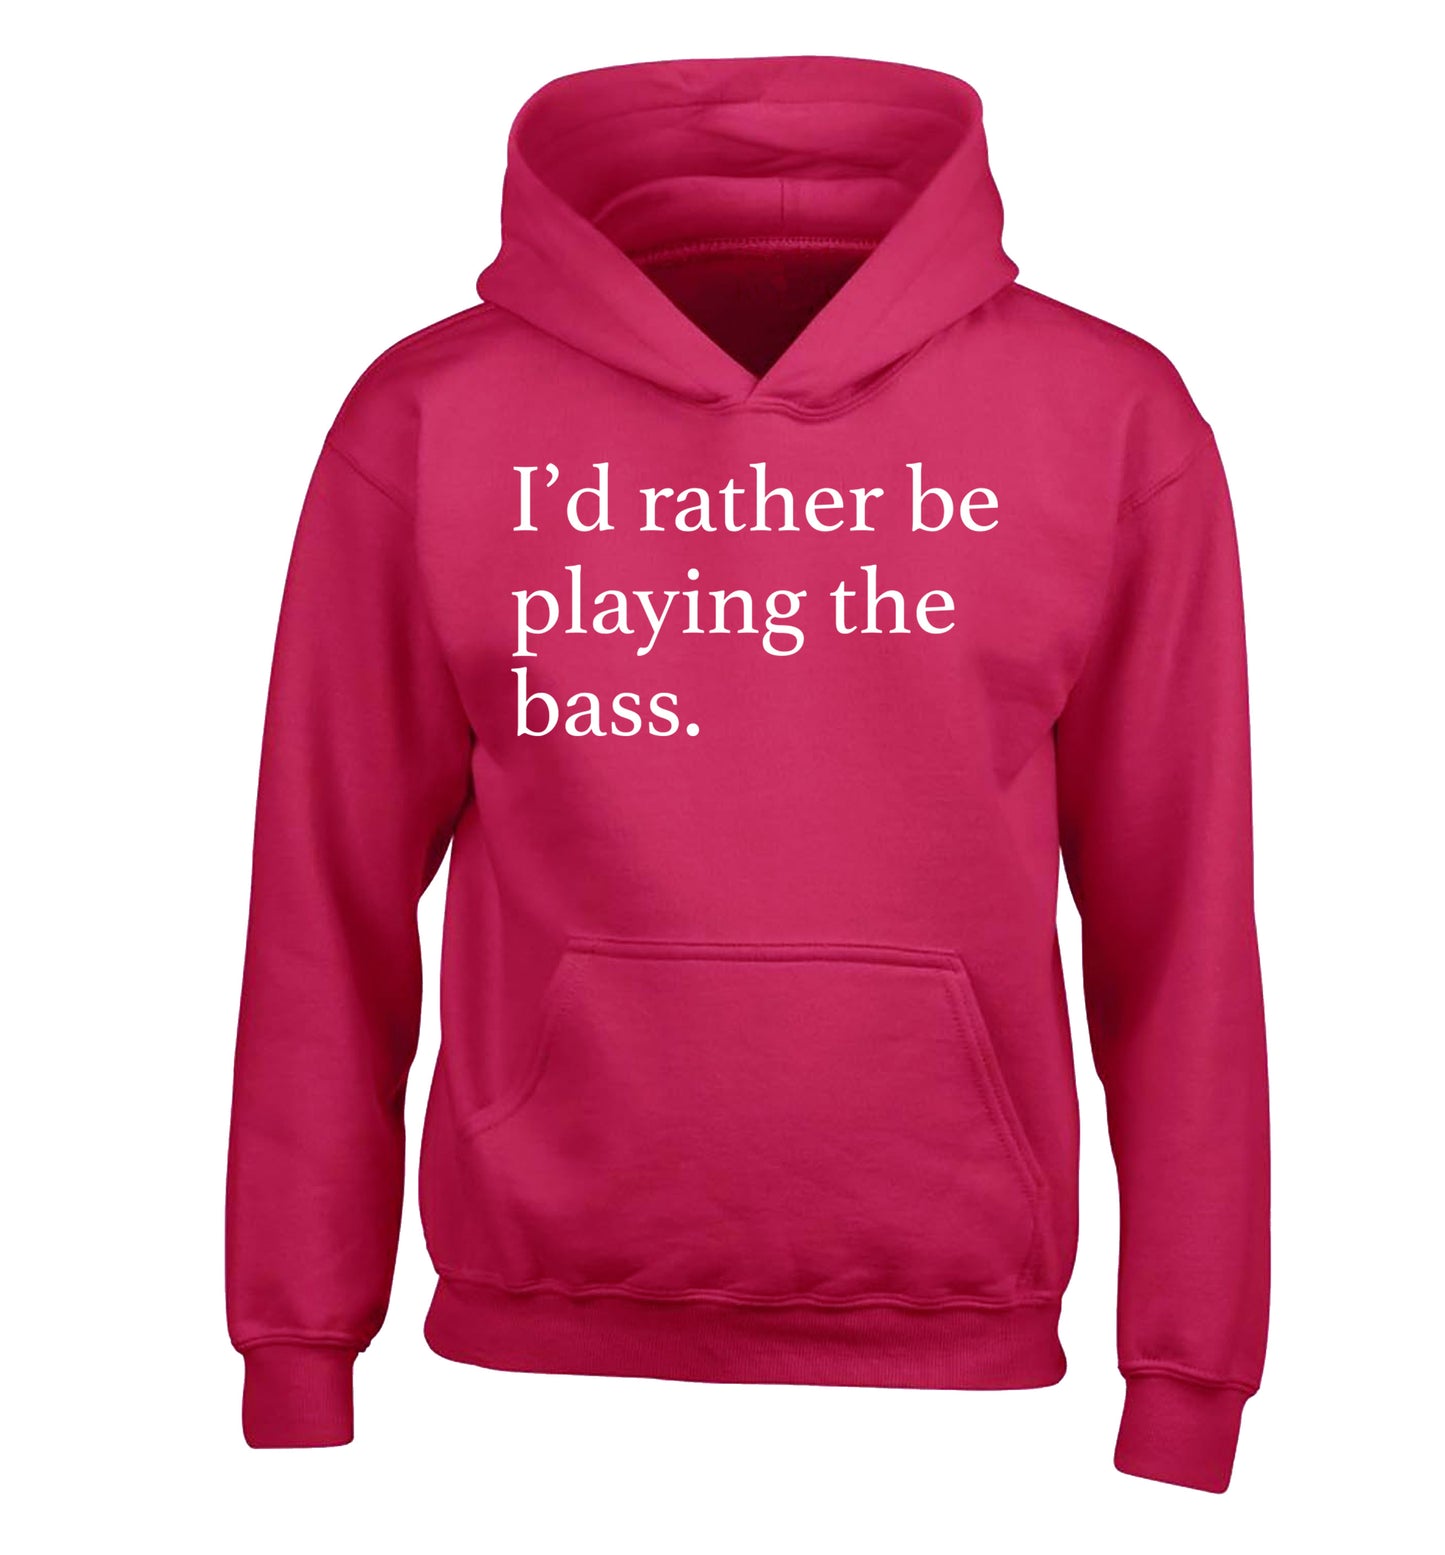 I'd rather by playing the bass children's pink hoodie 12-14 Years